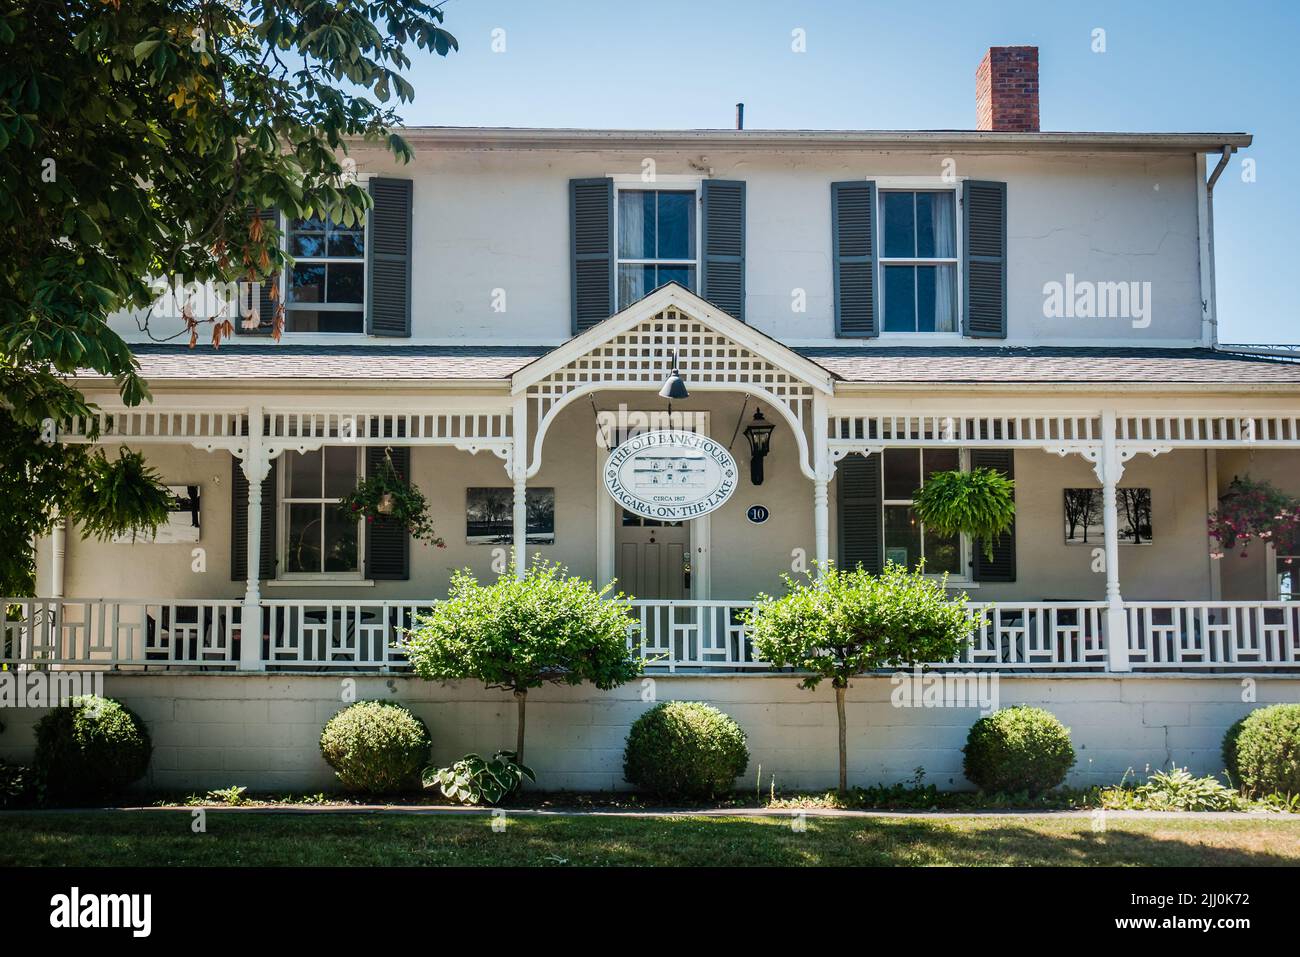 The old bank house is a bed and breakfast hotel located at niagara-on-the-lake, ontario, canada Stock Photo